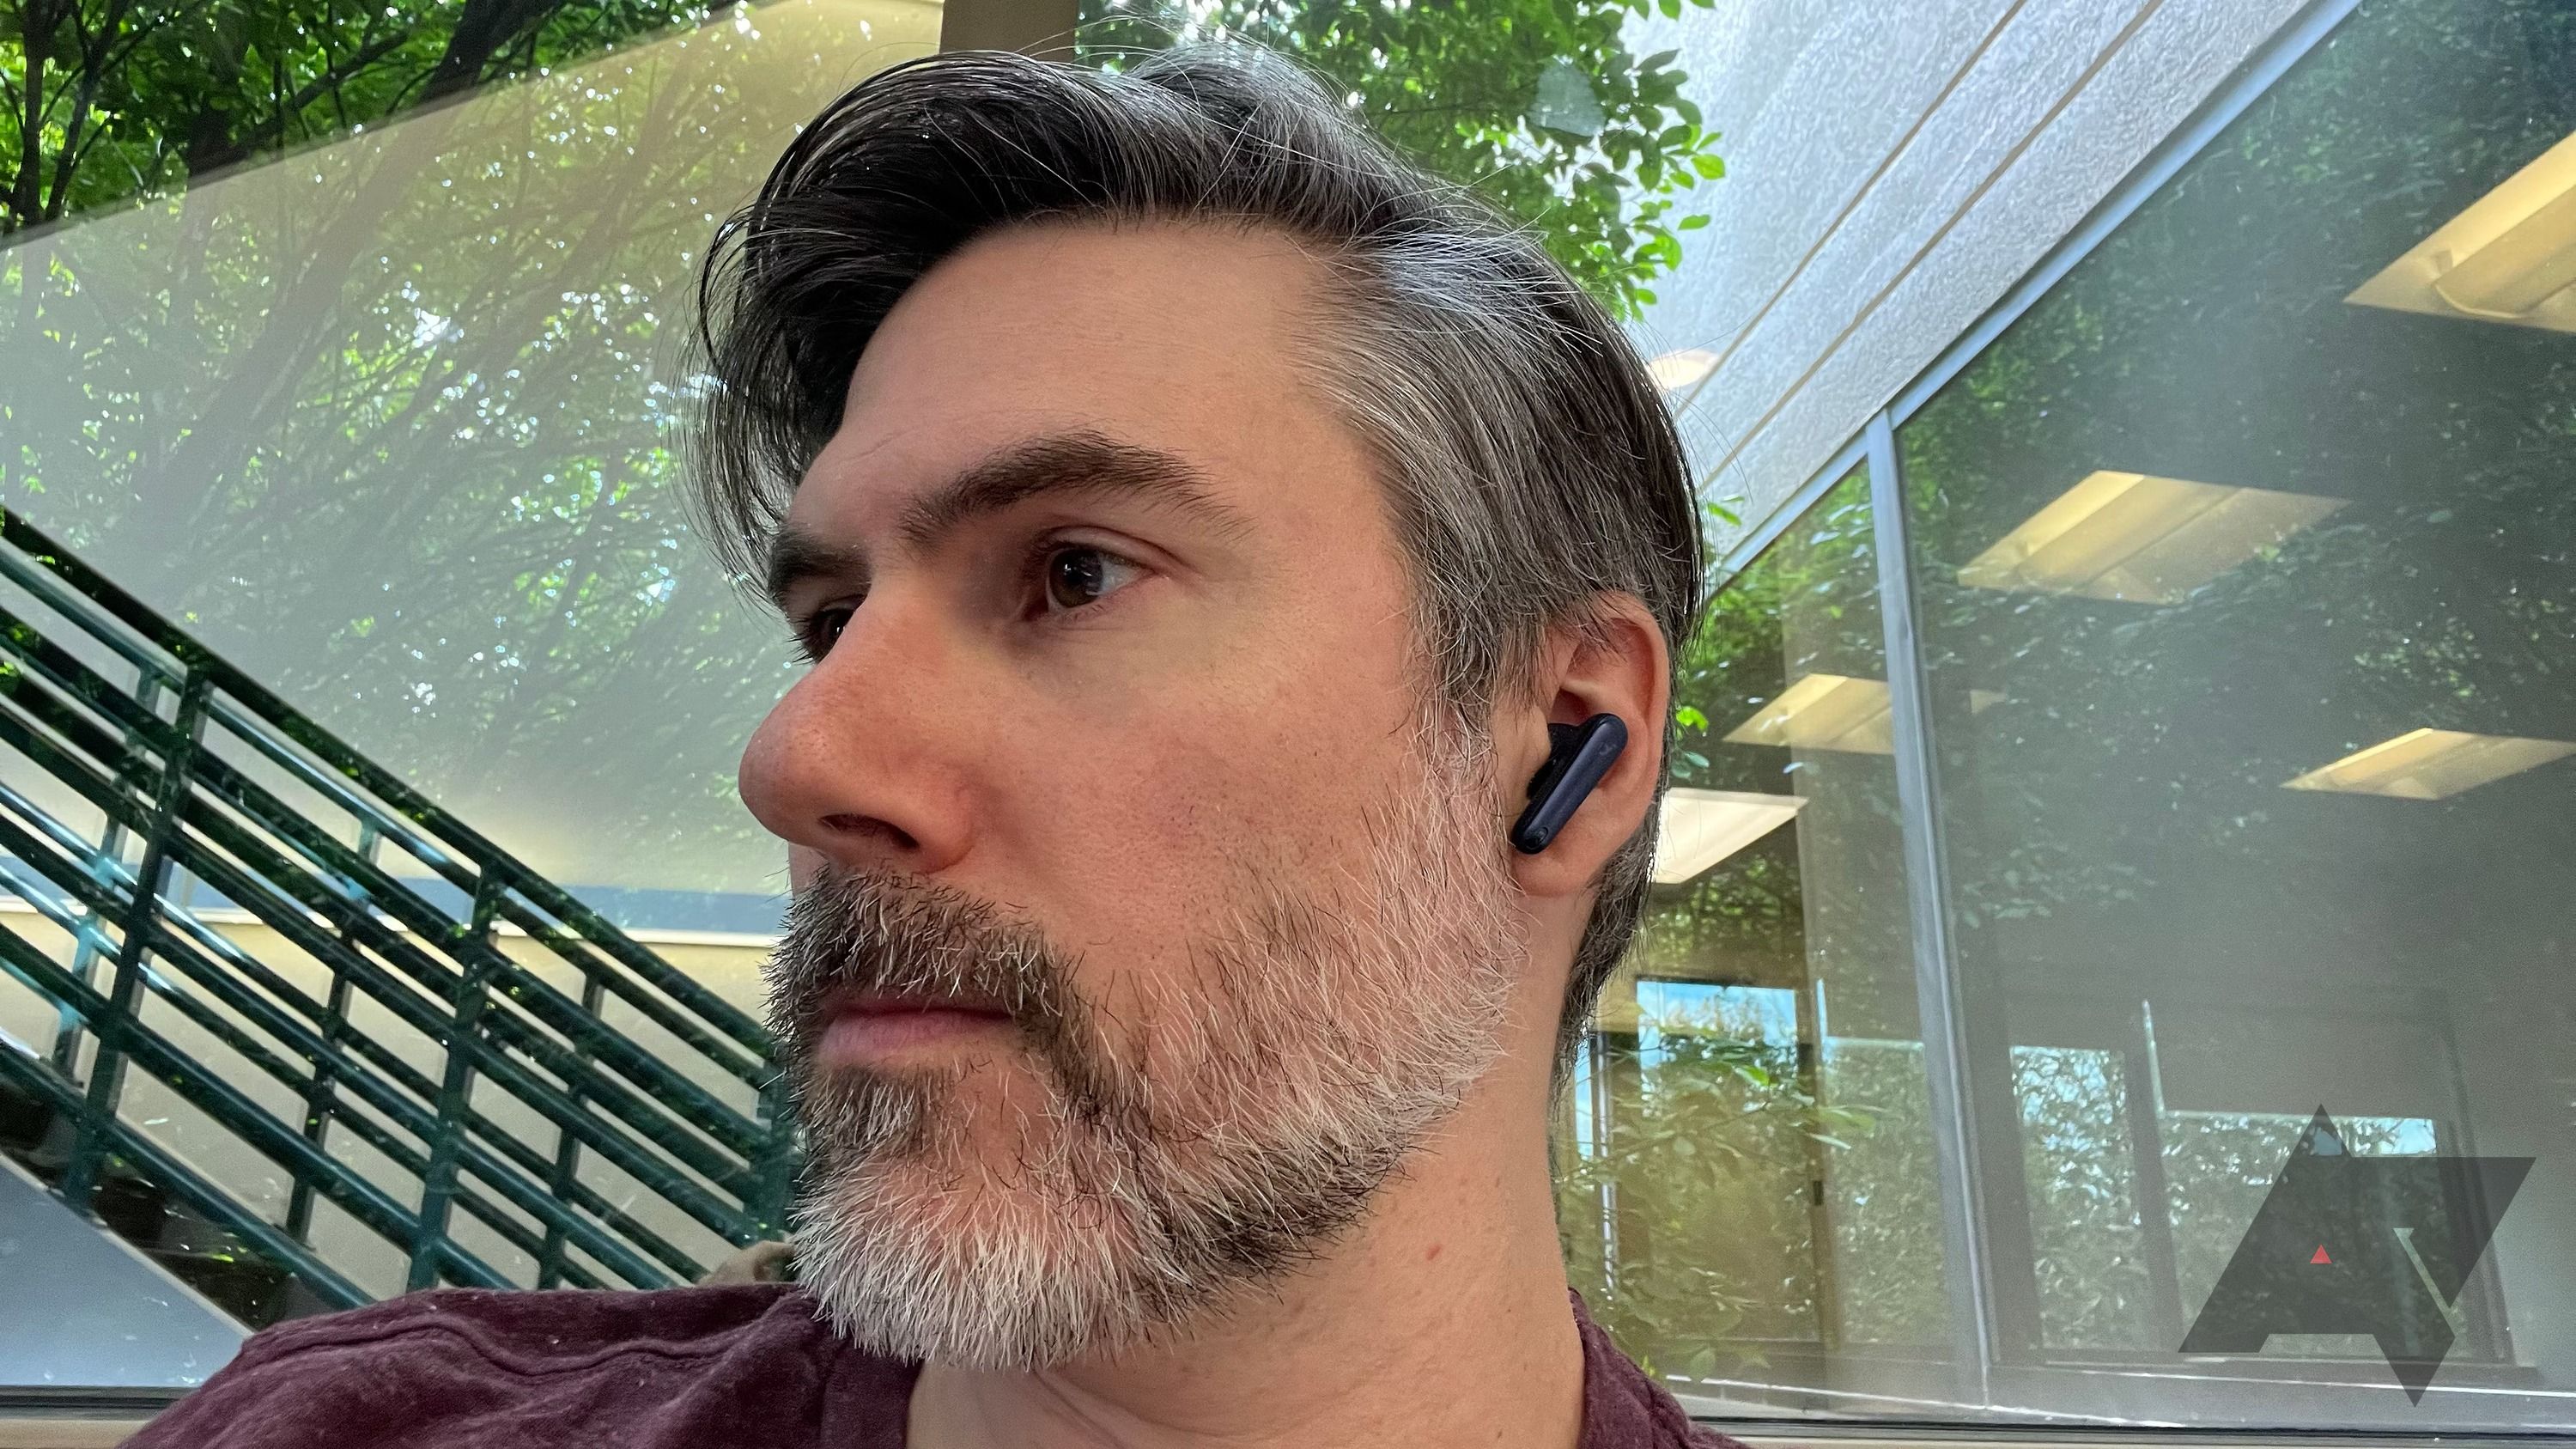 Soundcore Liberty 4 NC Are Possibly The Best ANC Earbuds Under $100